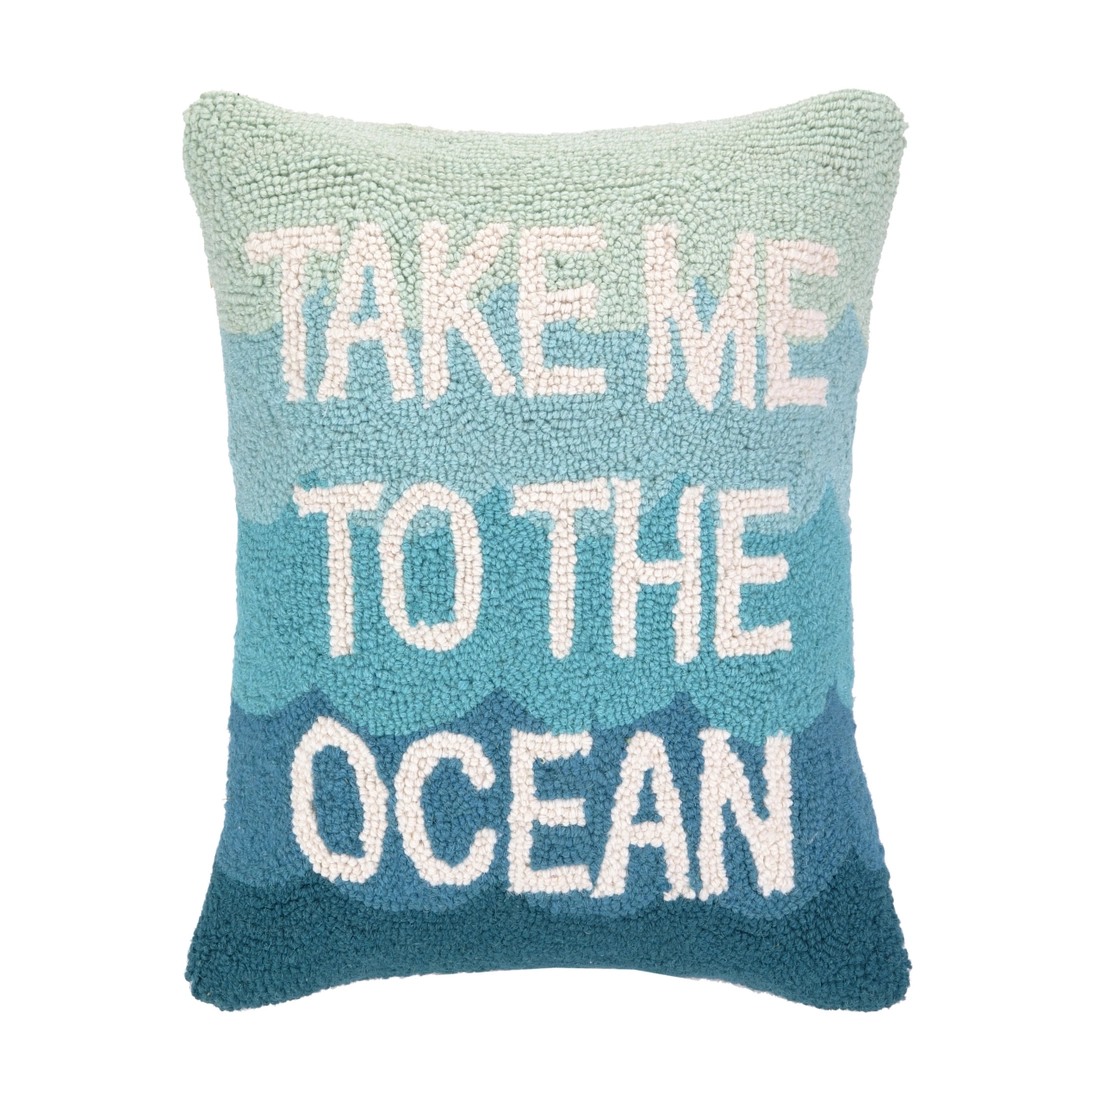 Take Me To The Ocean Hook Pillow - 14x18 – Fenwick Float-ors